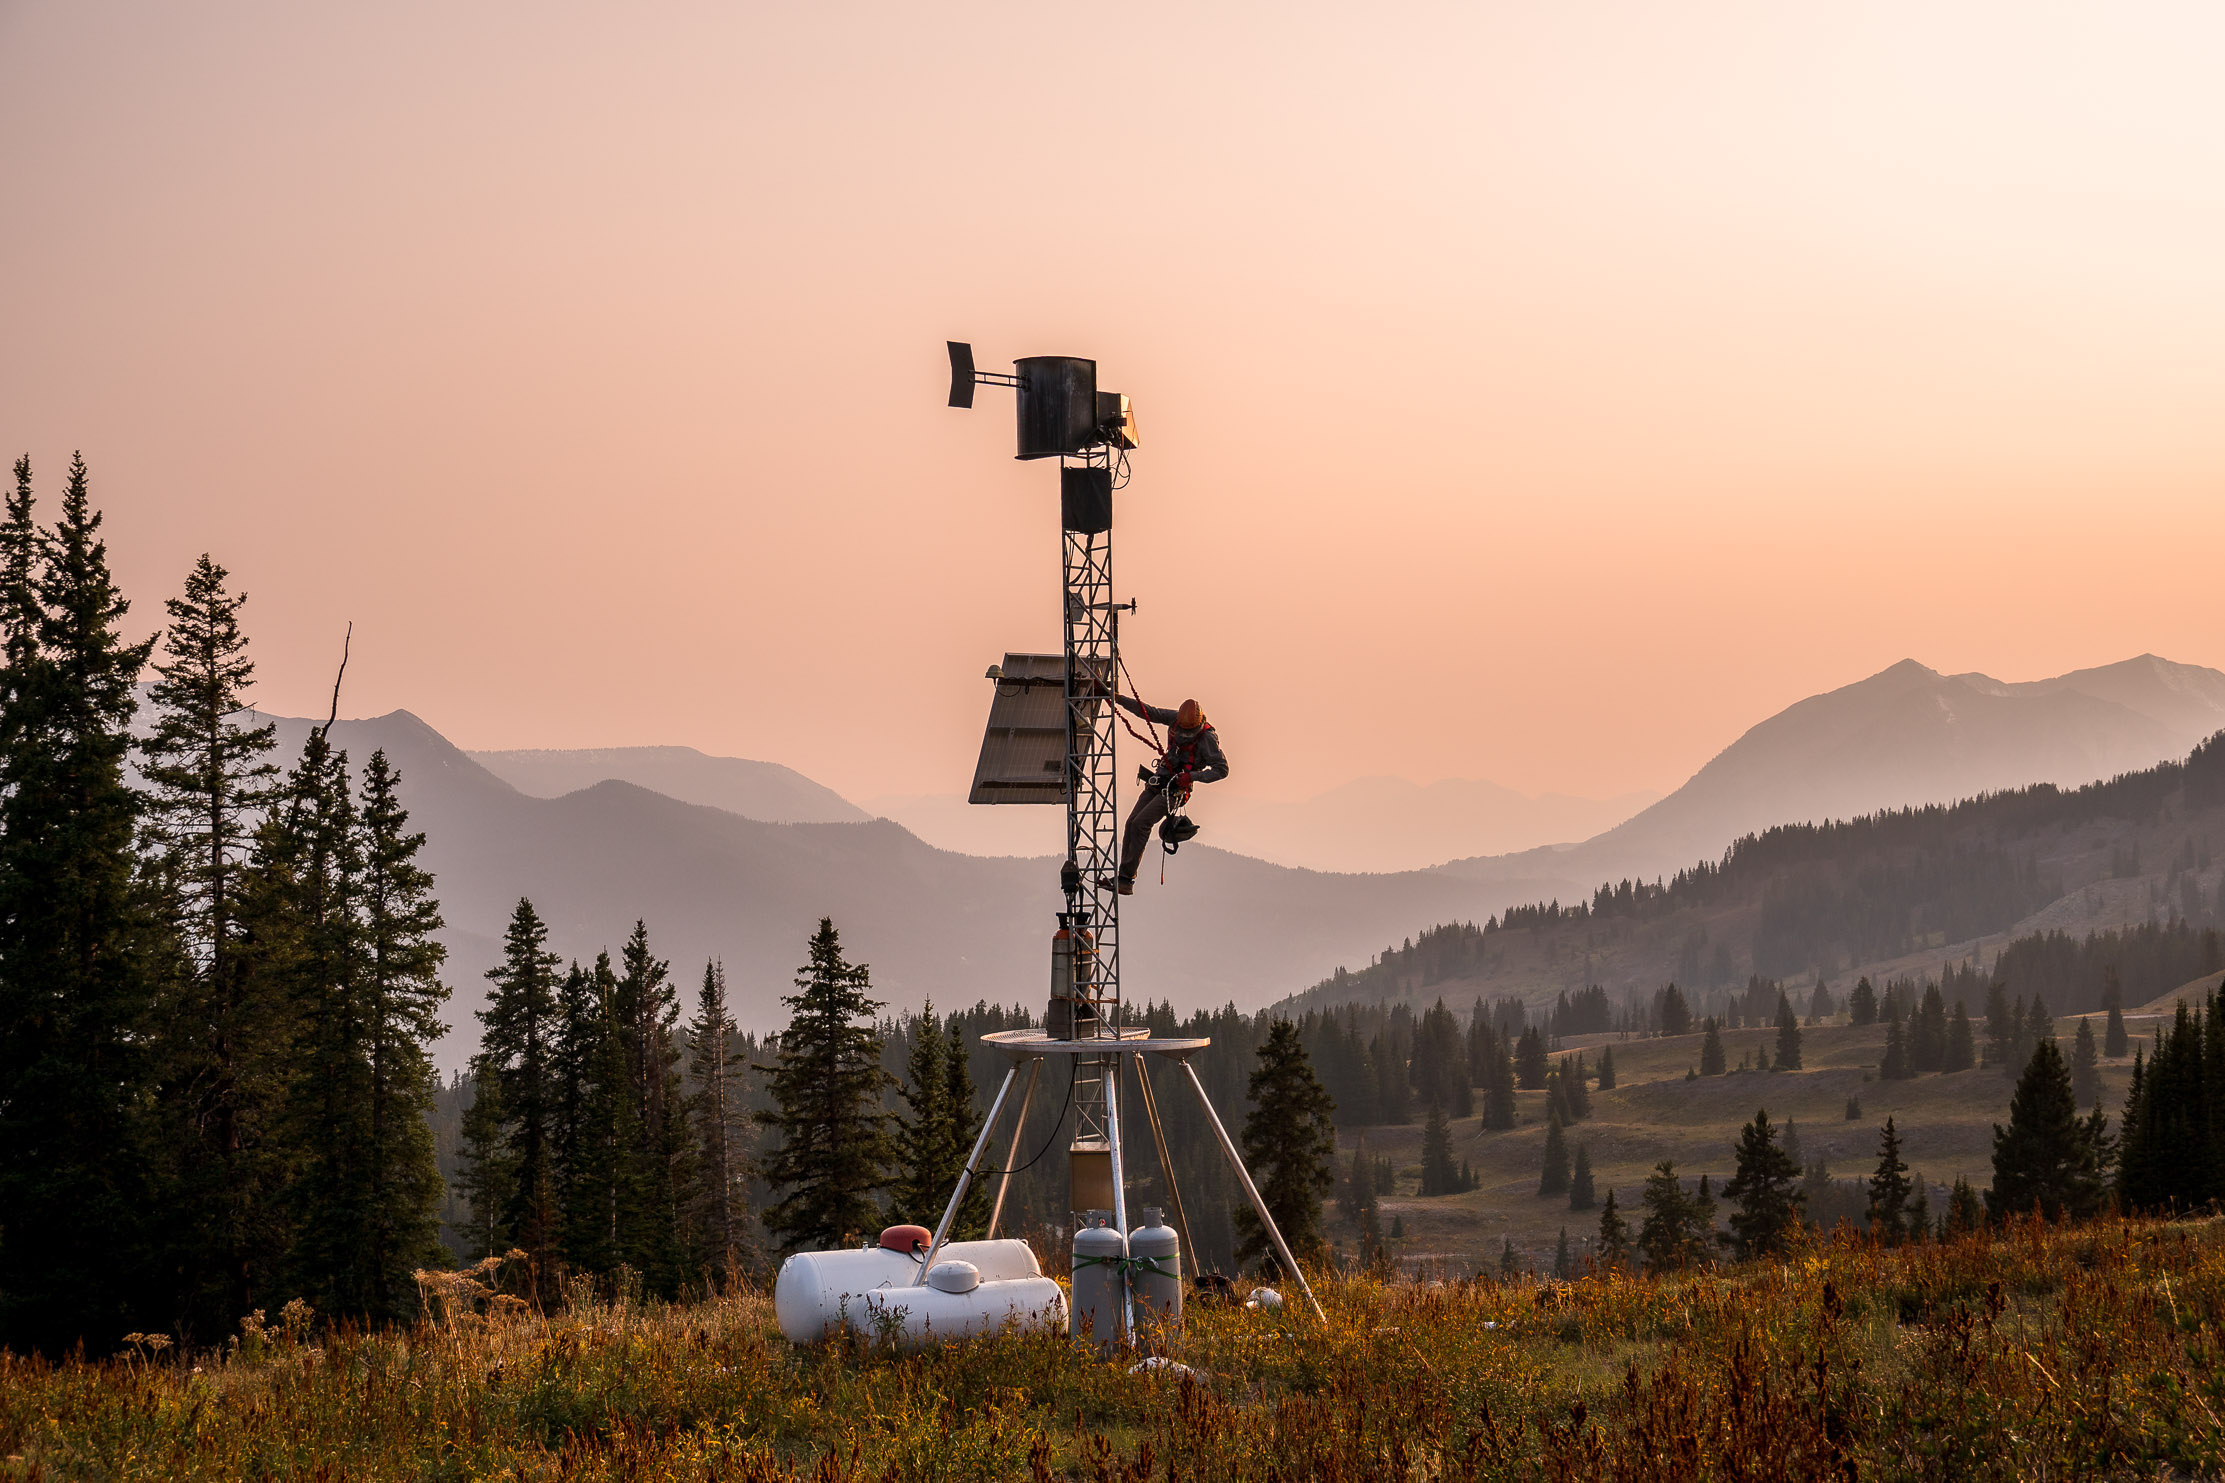 The silhouette of a lone scientist harnessed to a tall metal tower, with mountains and pine trees in the distance. The tower has instruments and devices including a solar panel and a propane flume.